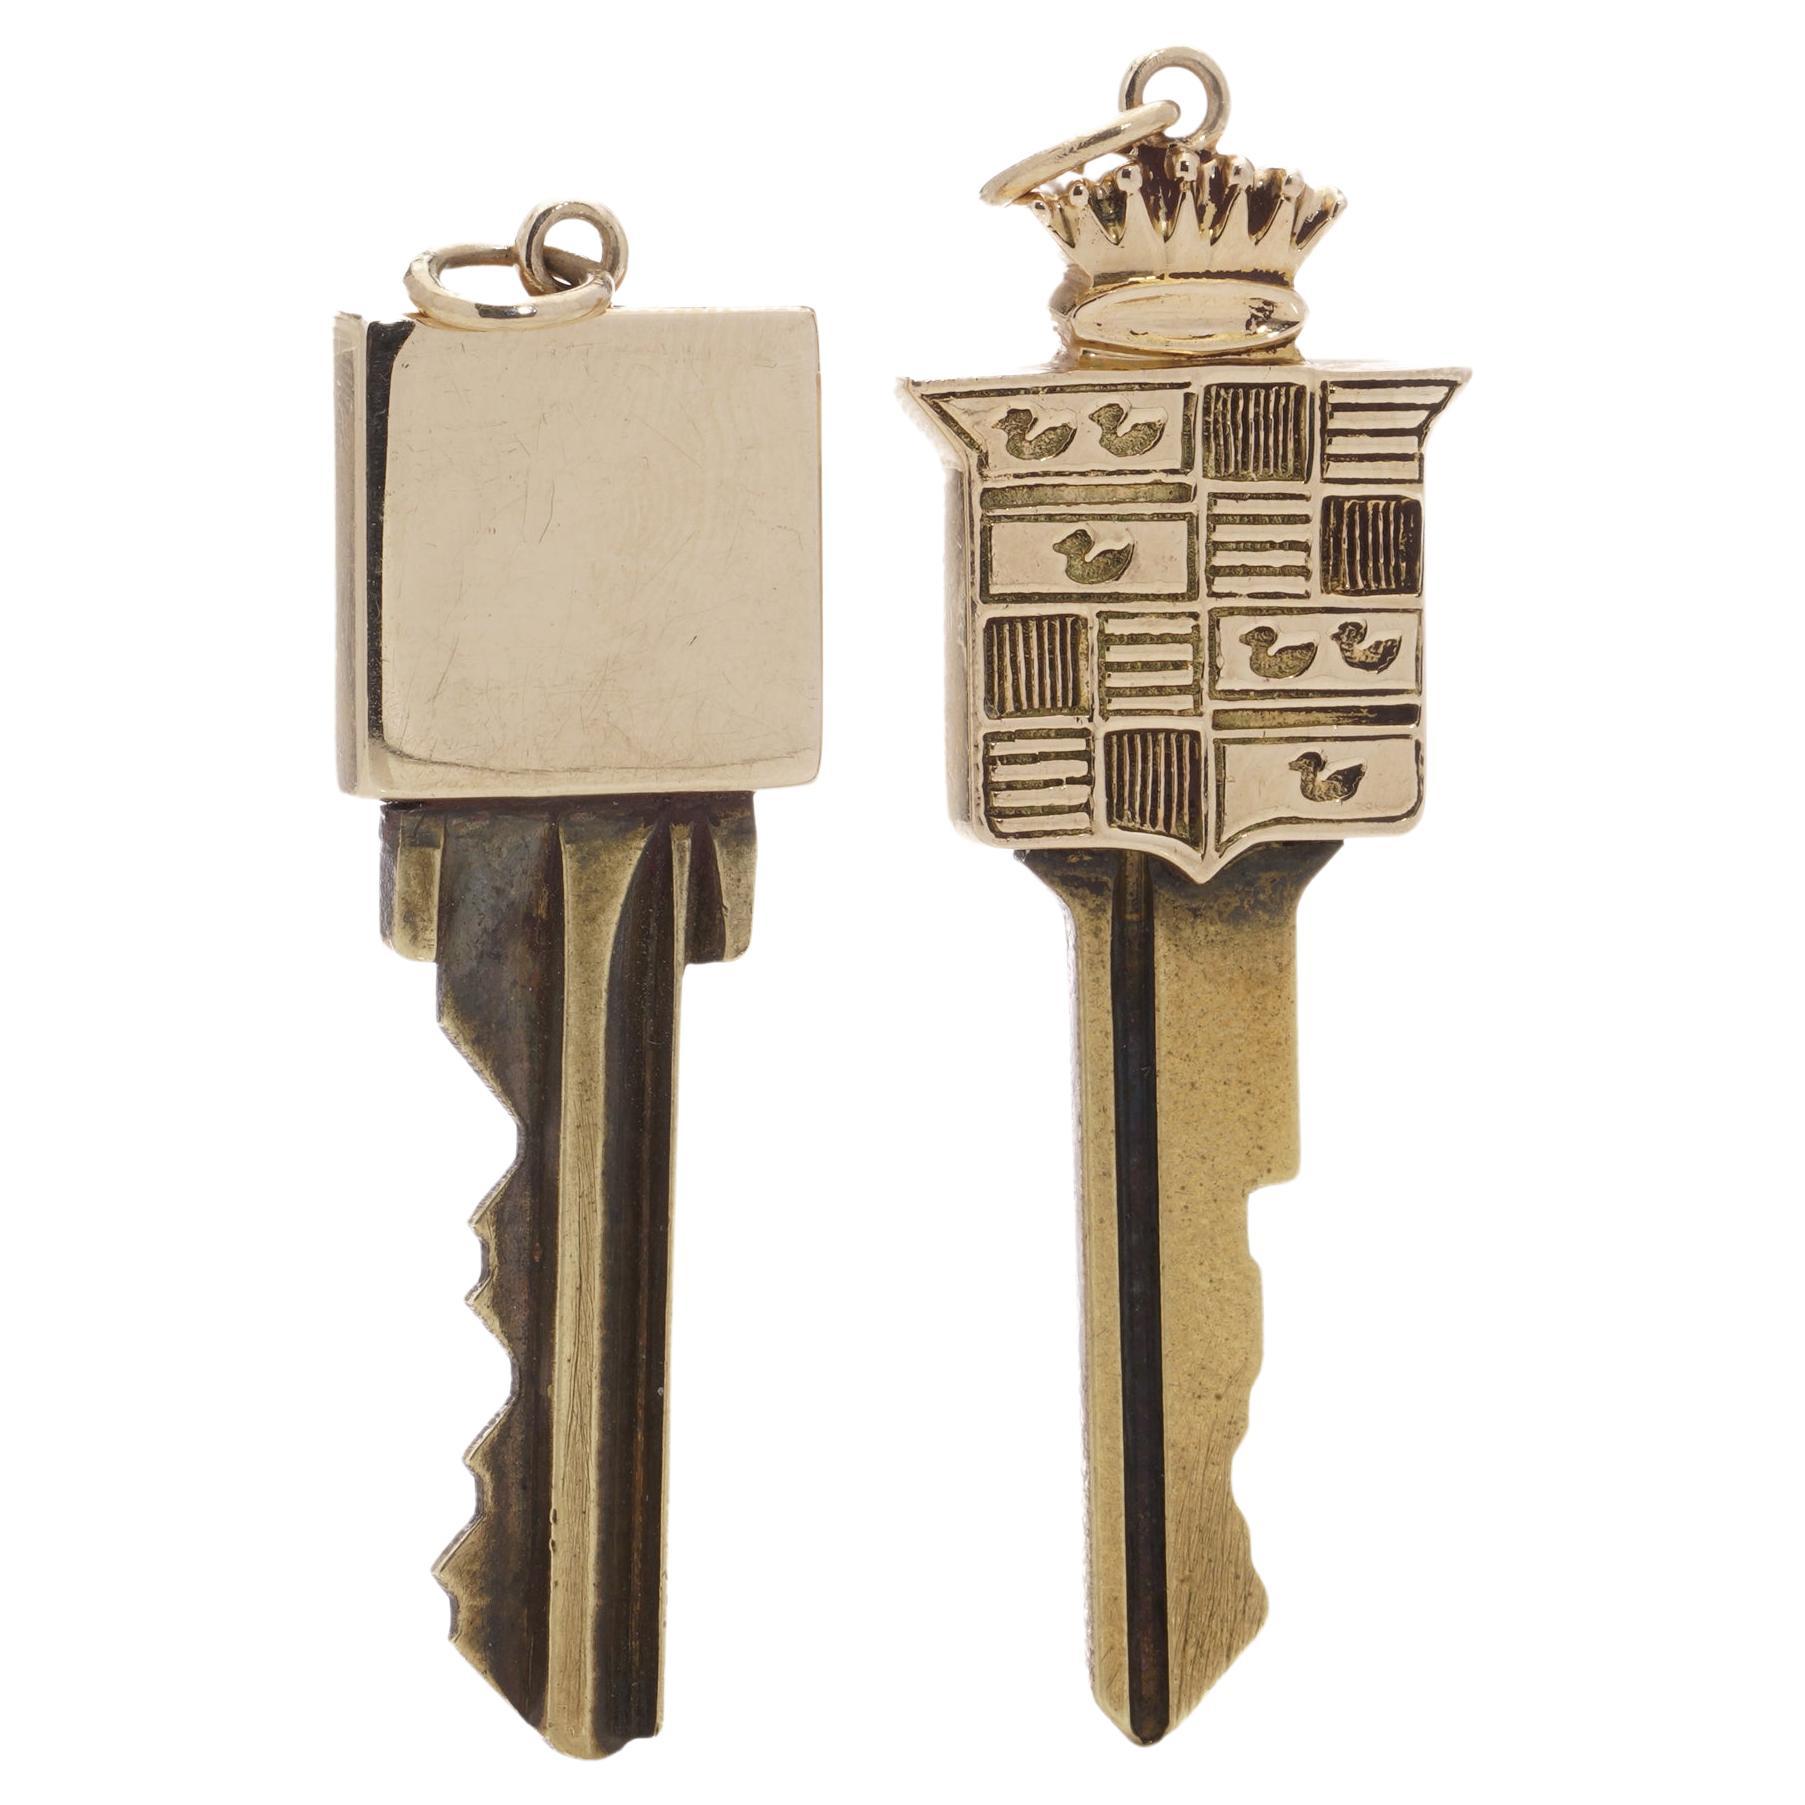 Two gold mounted keys, one with Cadillac logo design finial, Tiffany & Co. 14kt. For Sale